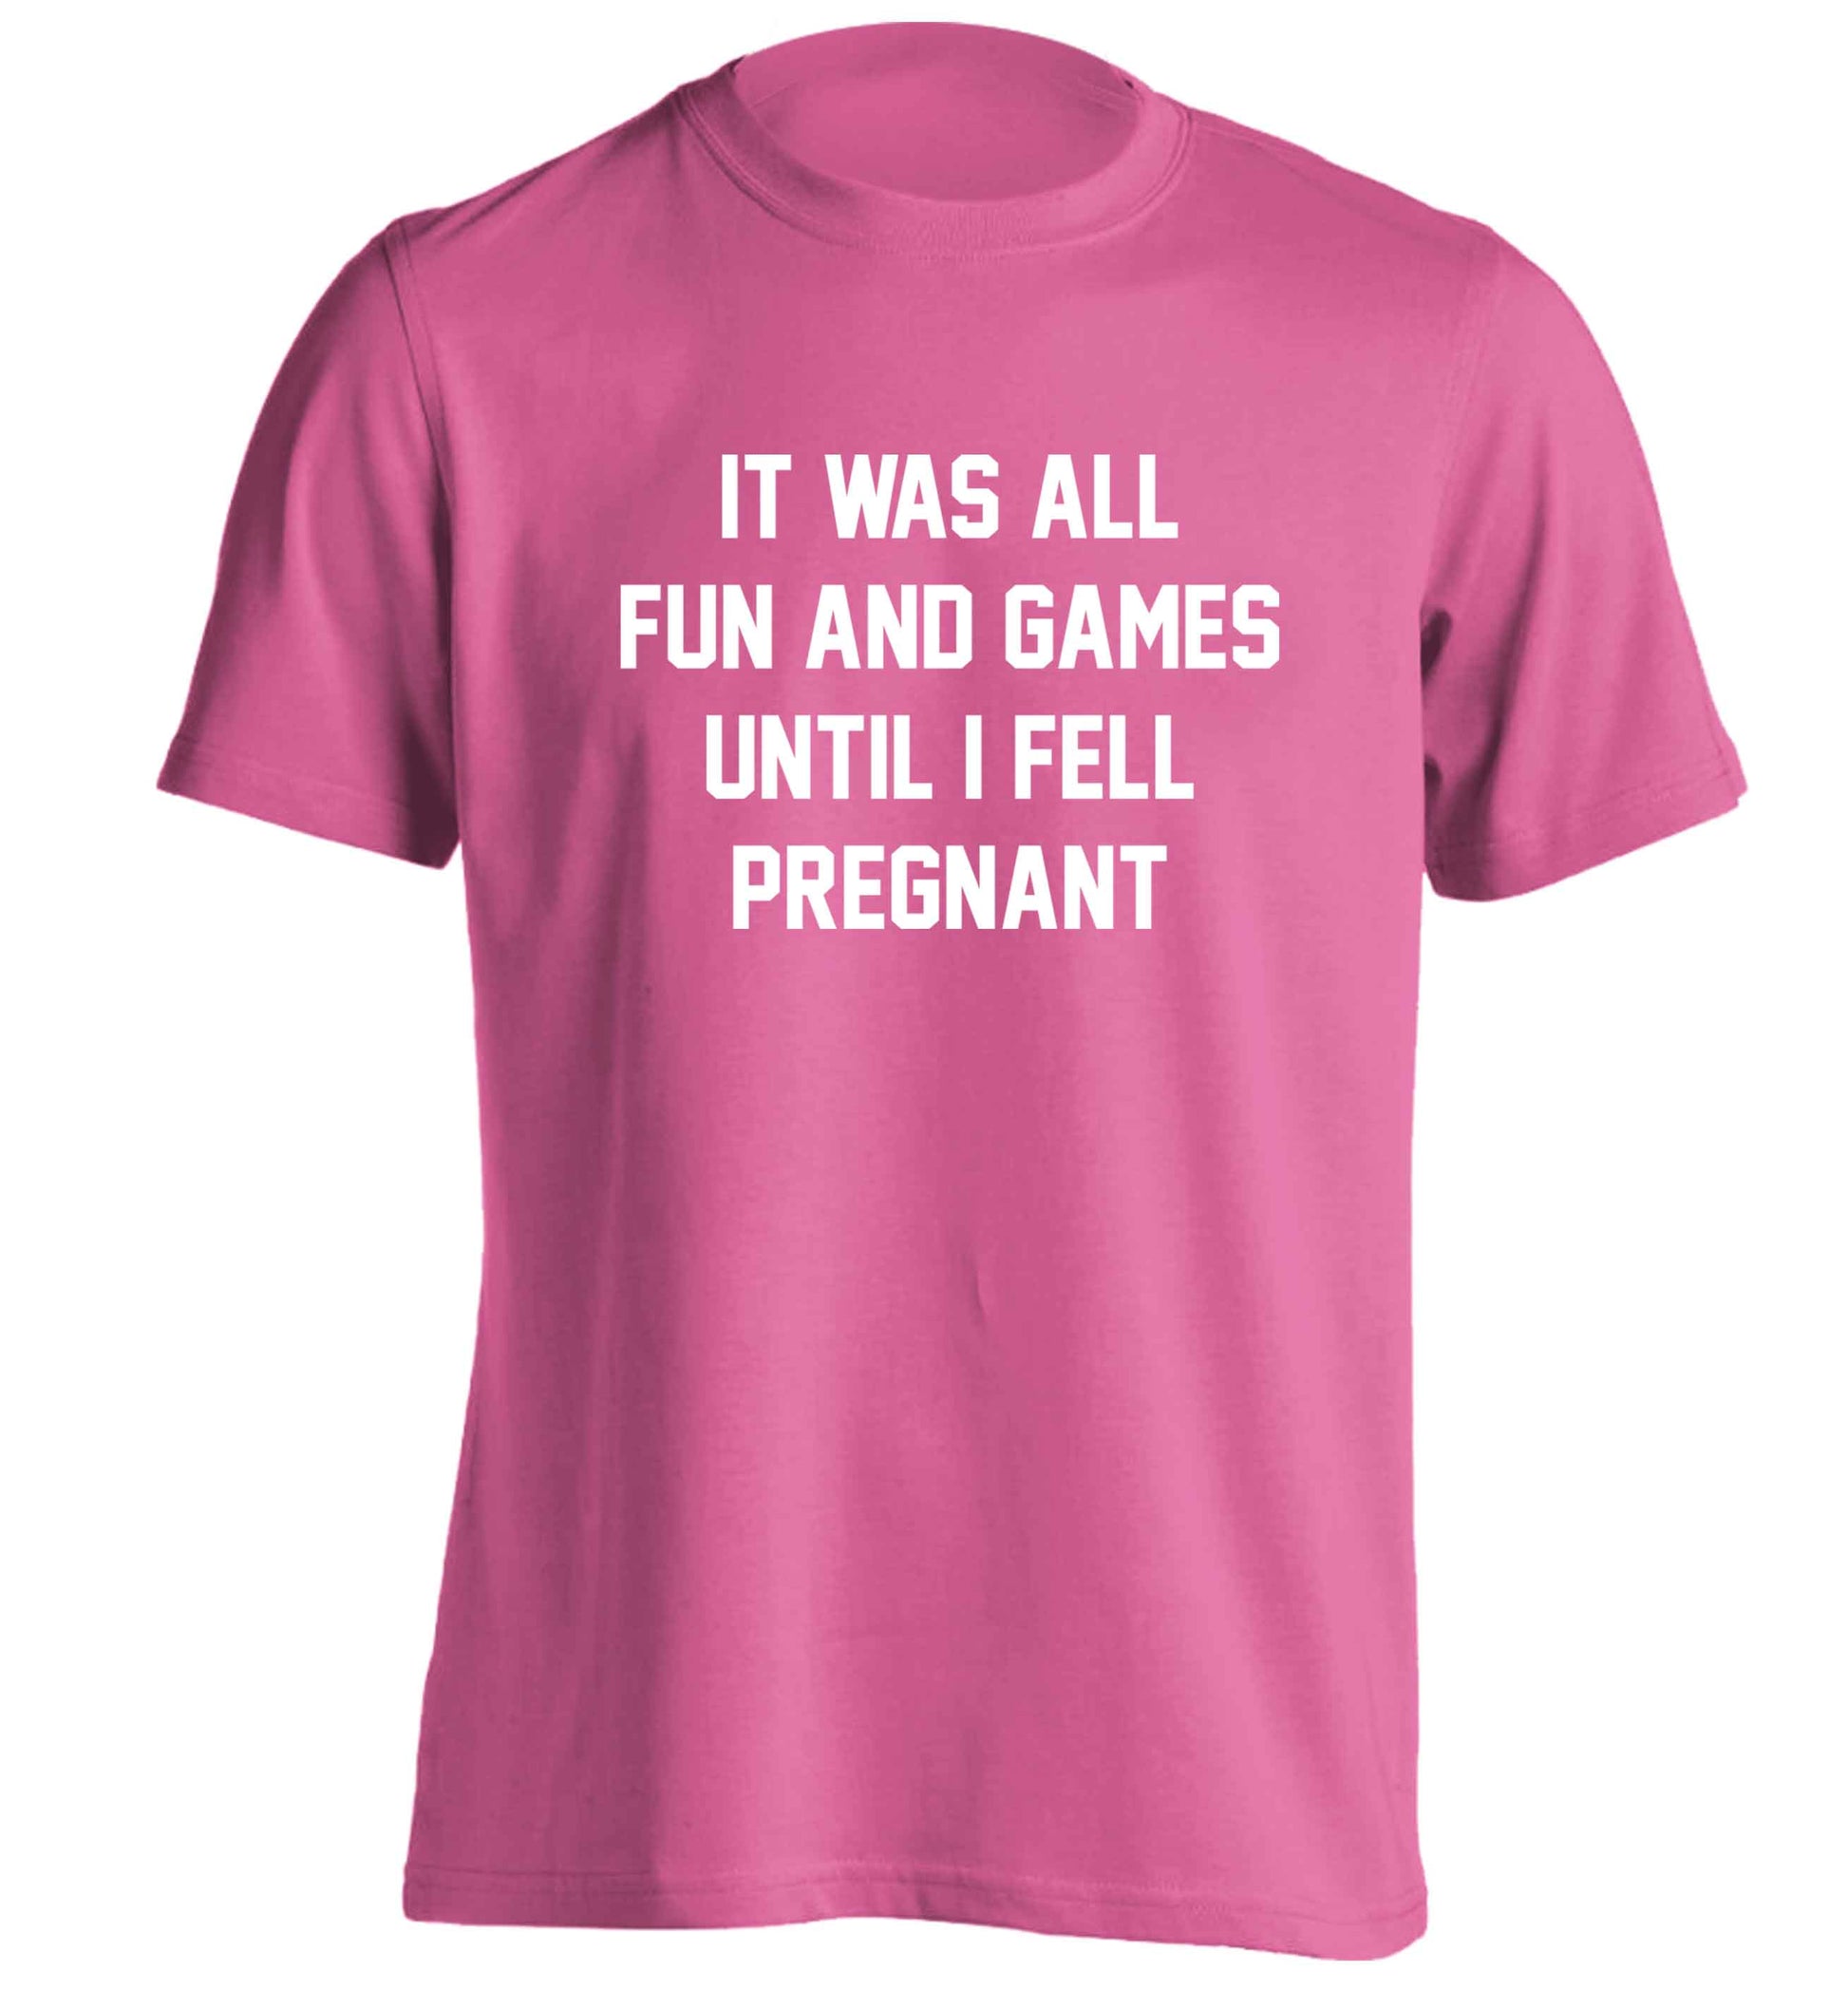 It was all fun and games until I fell pregnant kicks adults unisex pink Tshirt 2XL